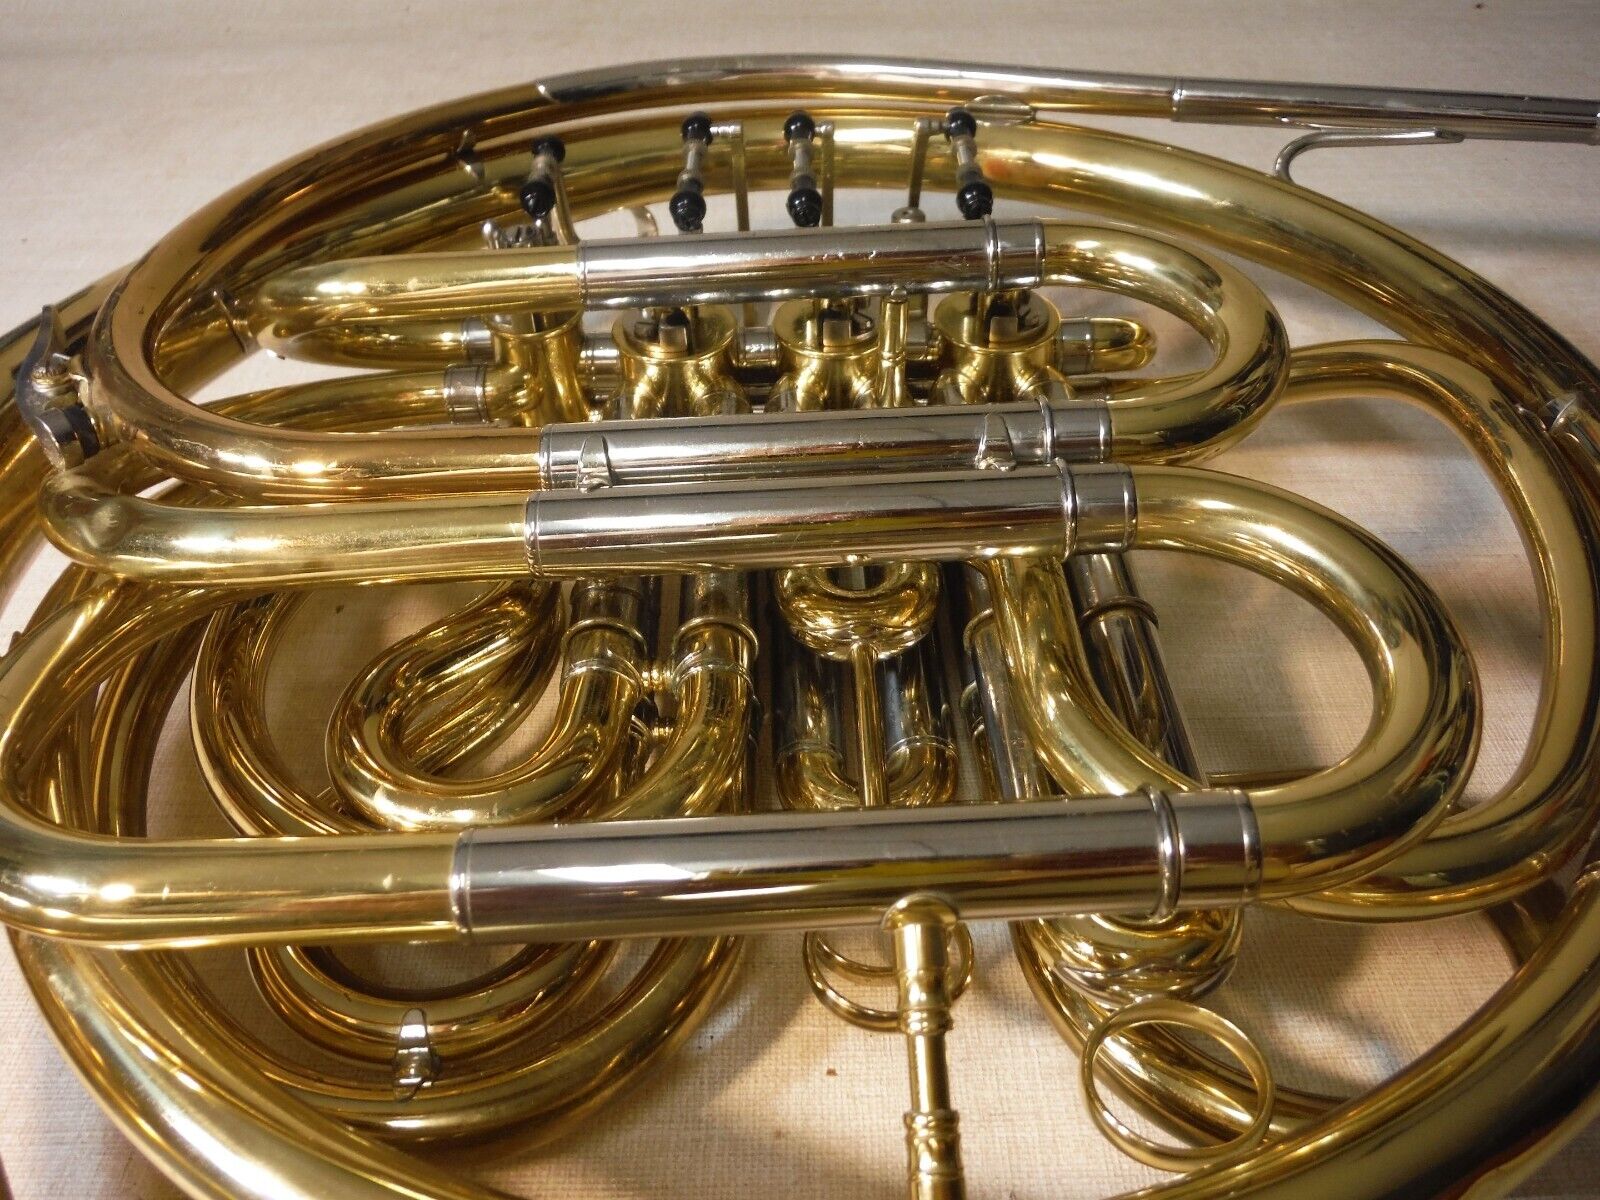 JUPITER JHR-852 DOUBLE FRENCH HORN BRASS WORKING GOOD W/DENTS CASE MOUTHPIECE 21